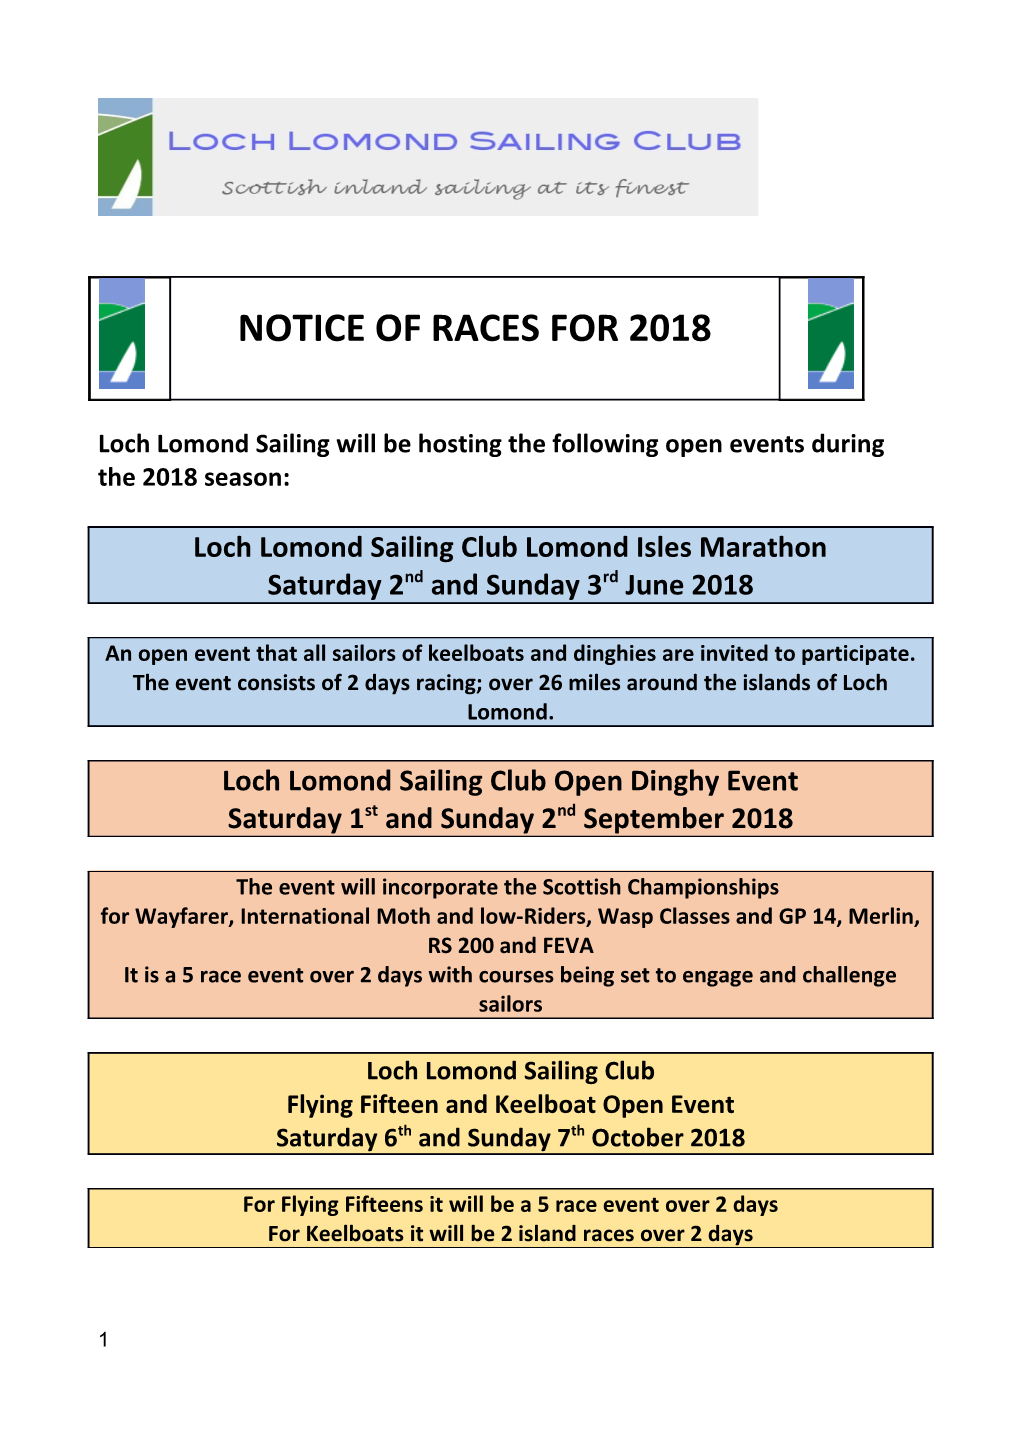 Loch Lomond Sailing Will Be Hosting the Following Open Events During the 2018 Season